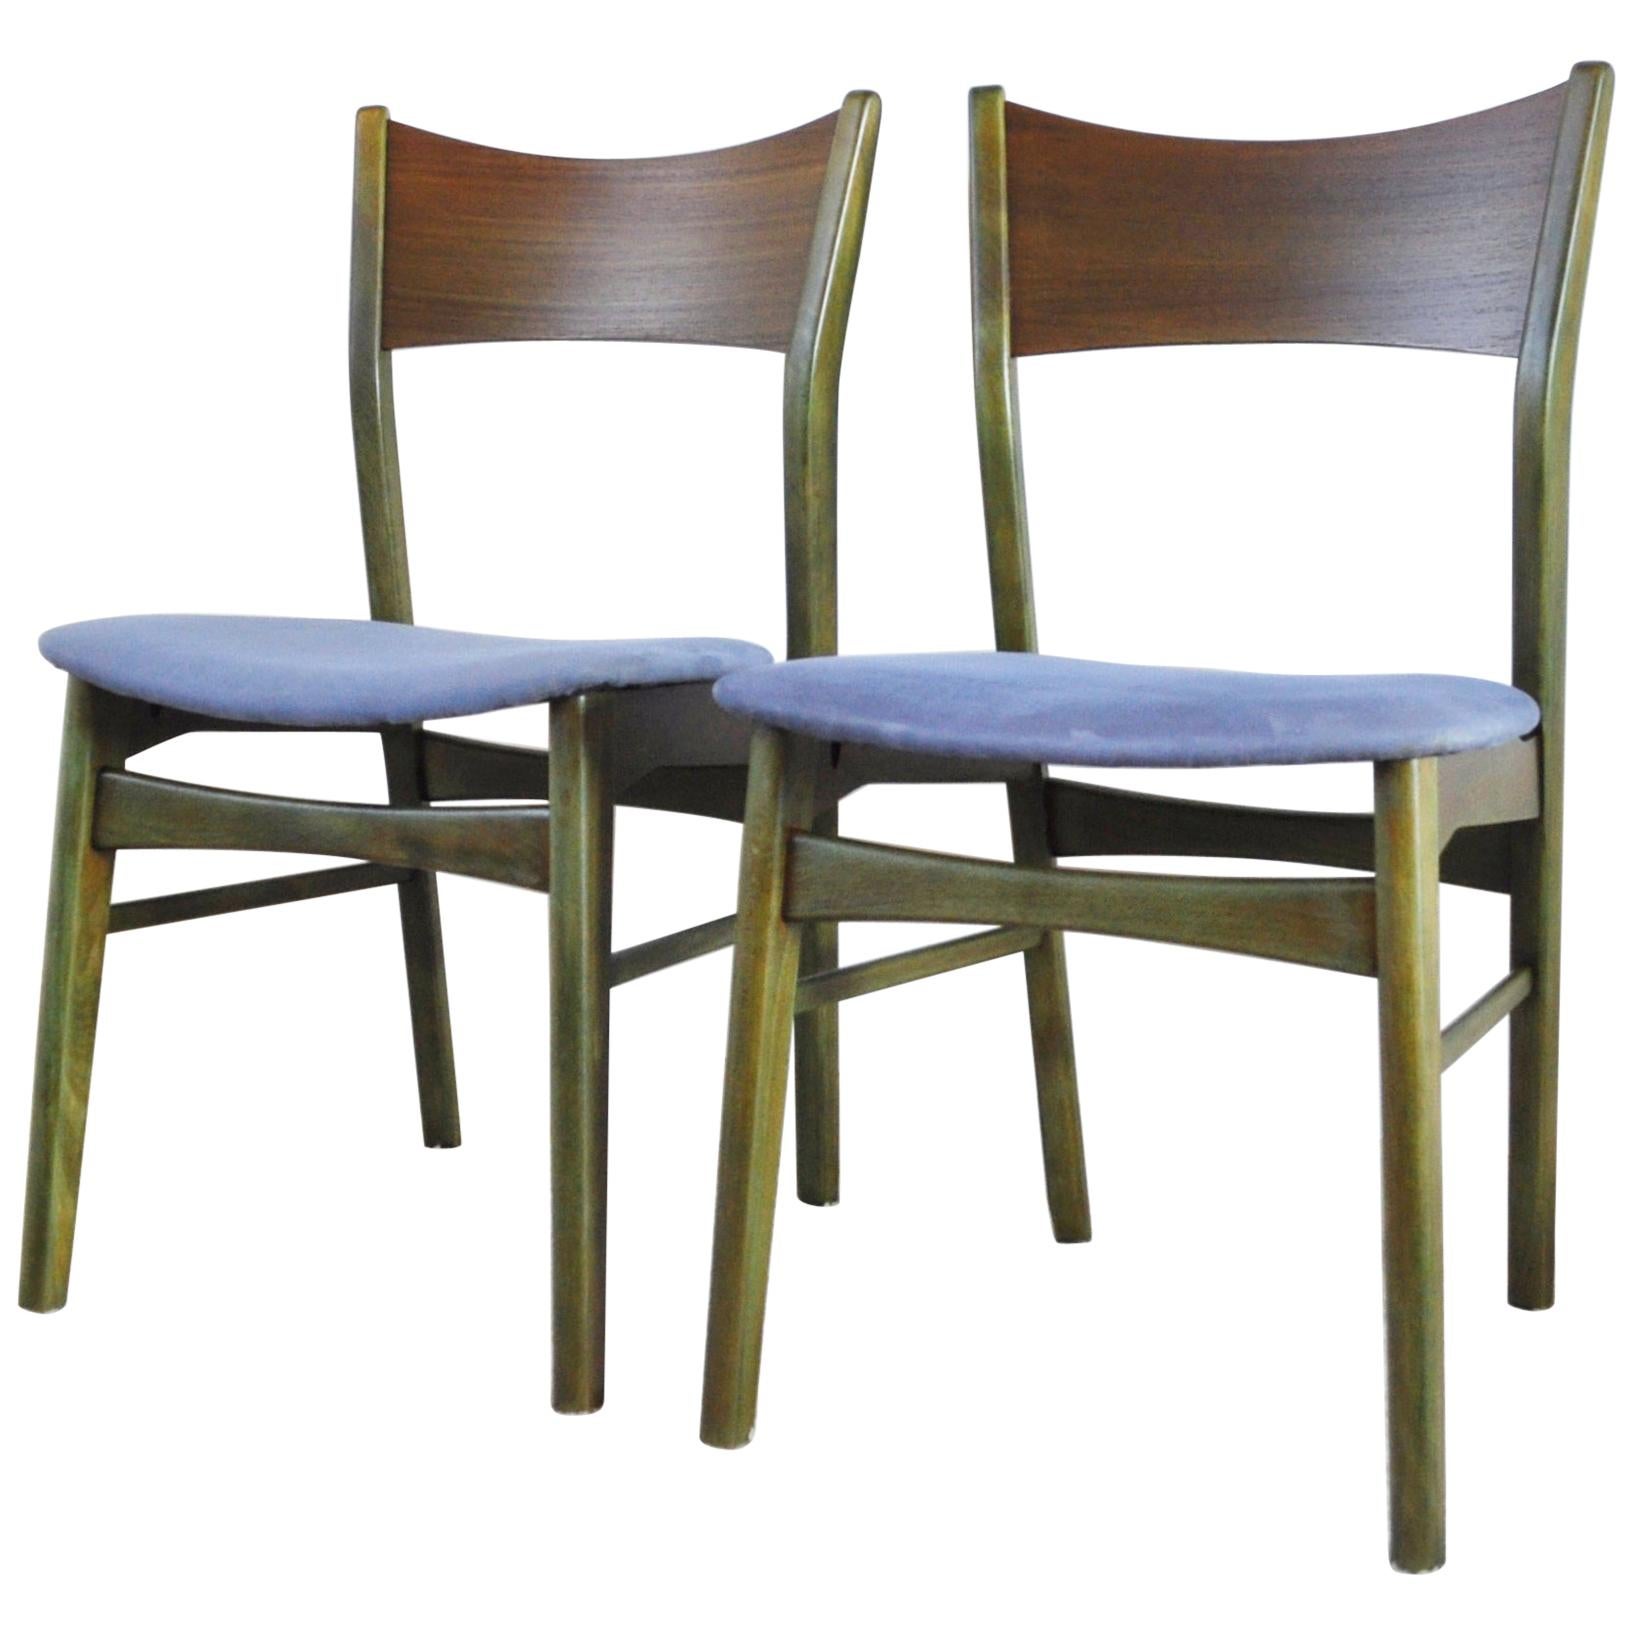 Danish Modern Dining Chair Stained in an Emerald Color, 1960s For Sale